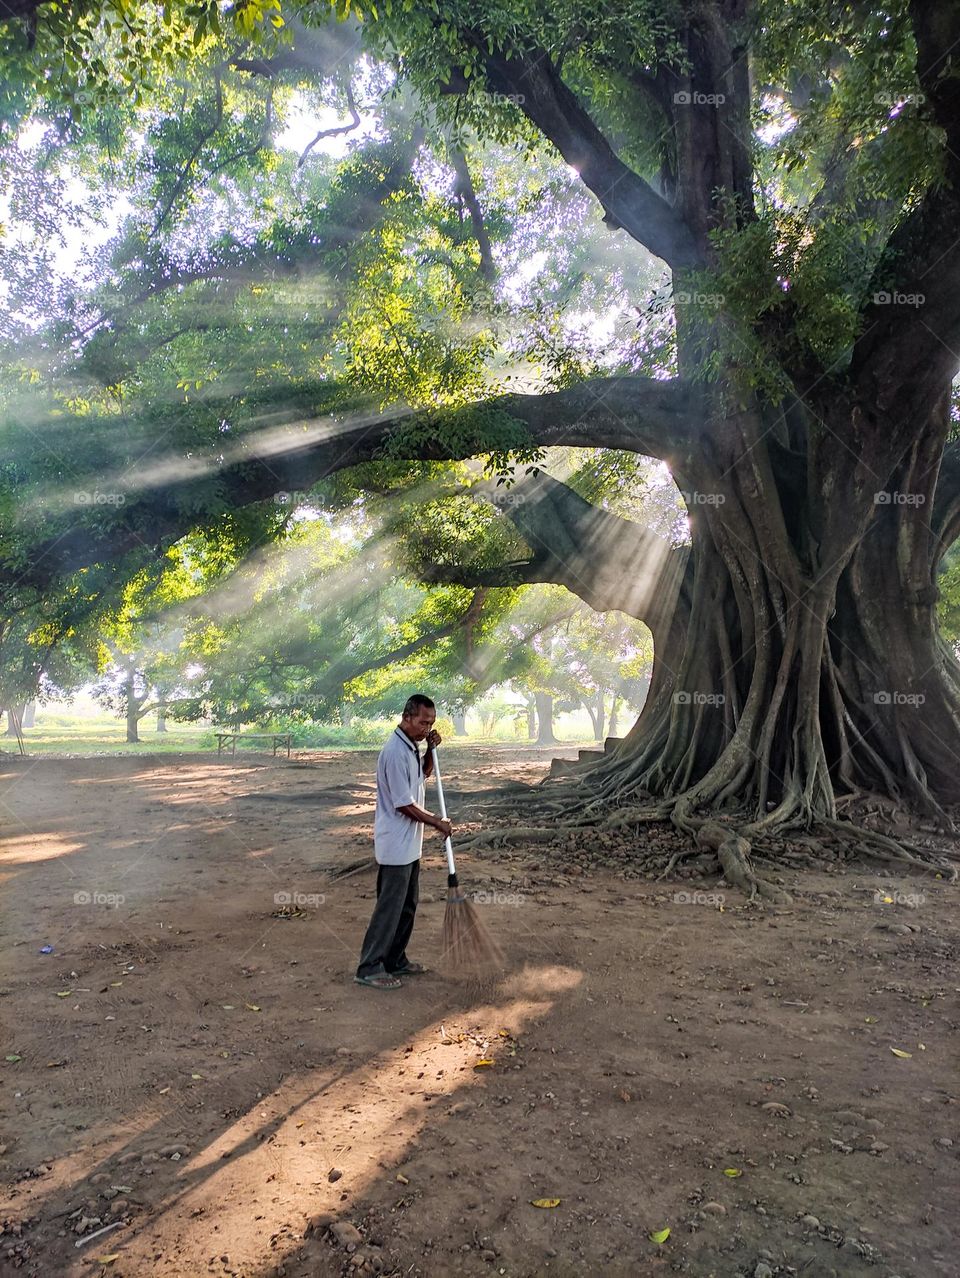 The gardener who is cleaning a big tree